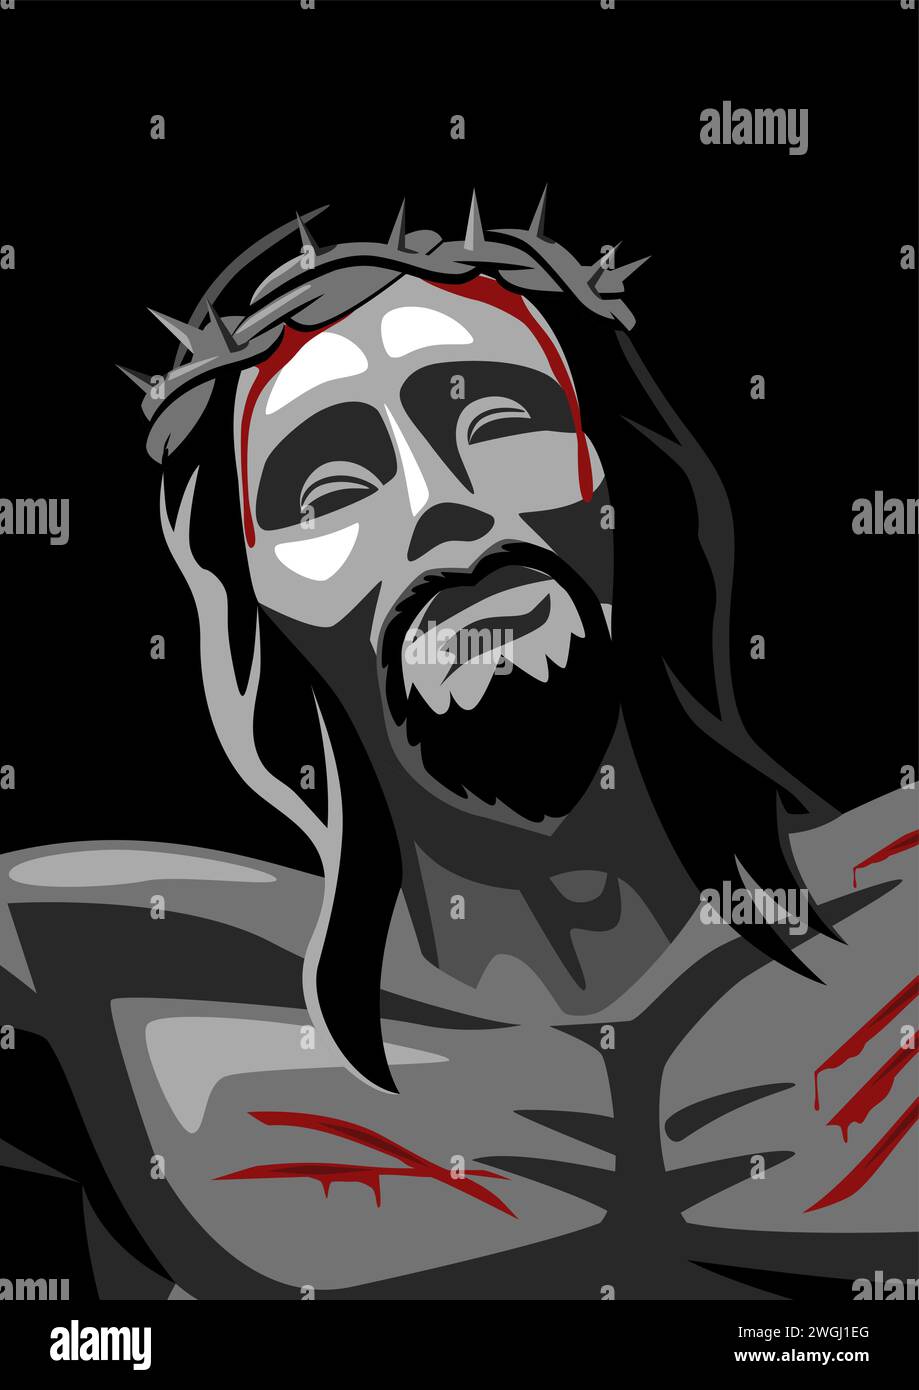 Close up vector illustration of Jesus face on the cross wearing a crown of thorns Stock Vector